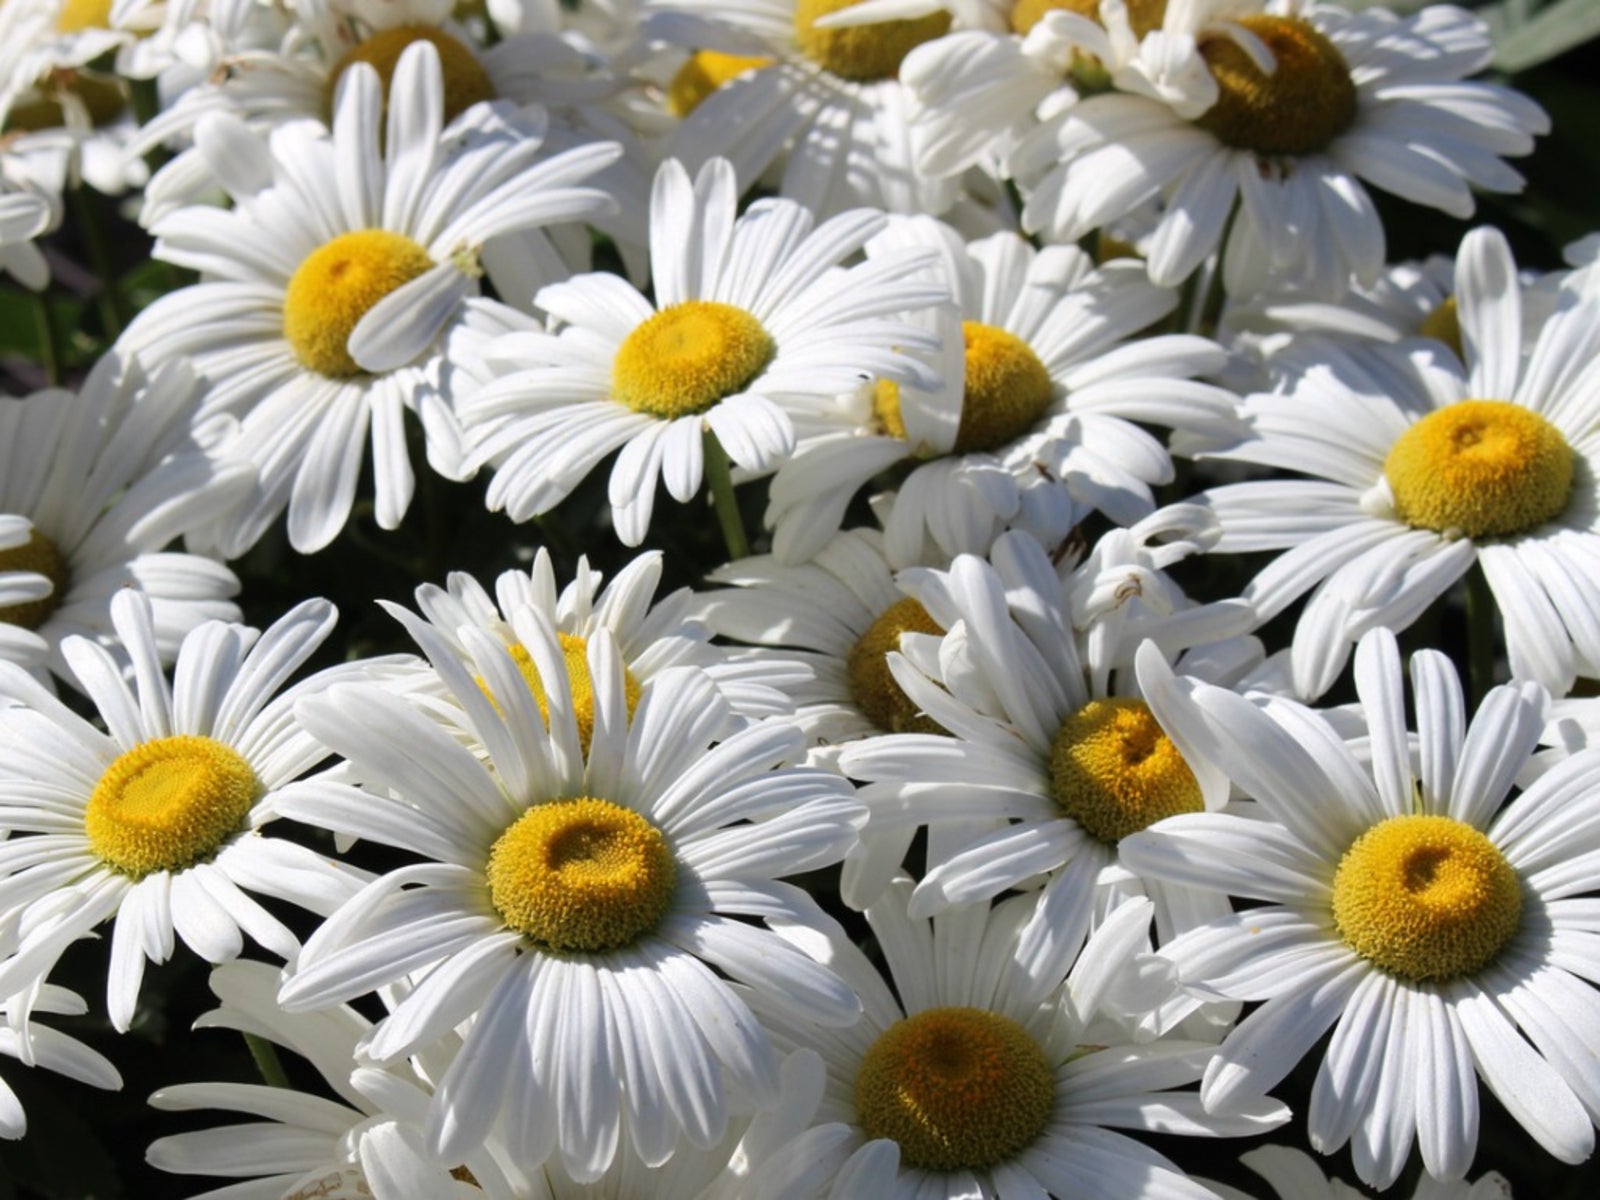 10,000 Stunning Daisy Flower Images for Free [HD]